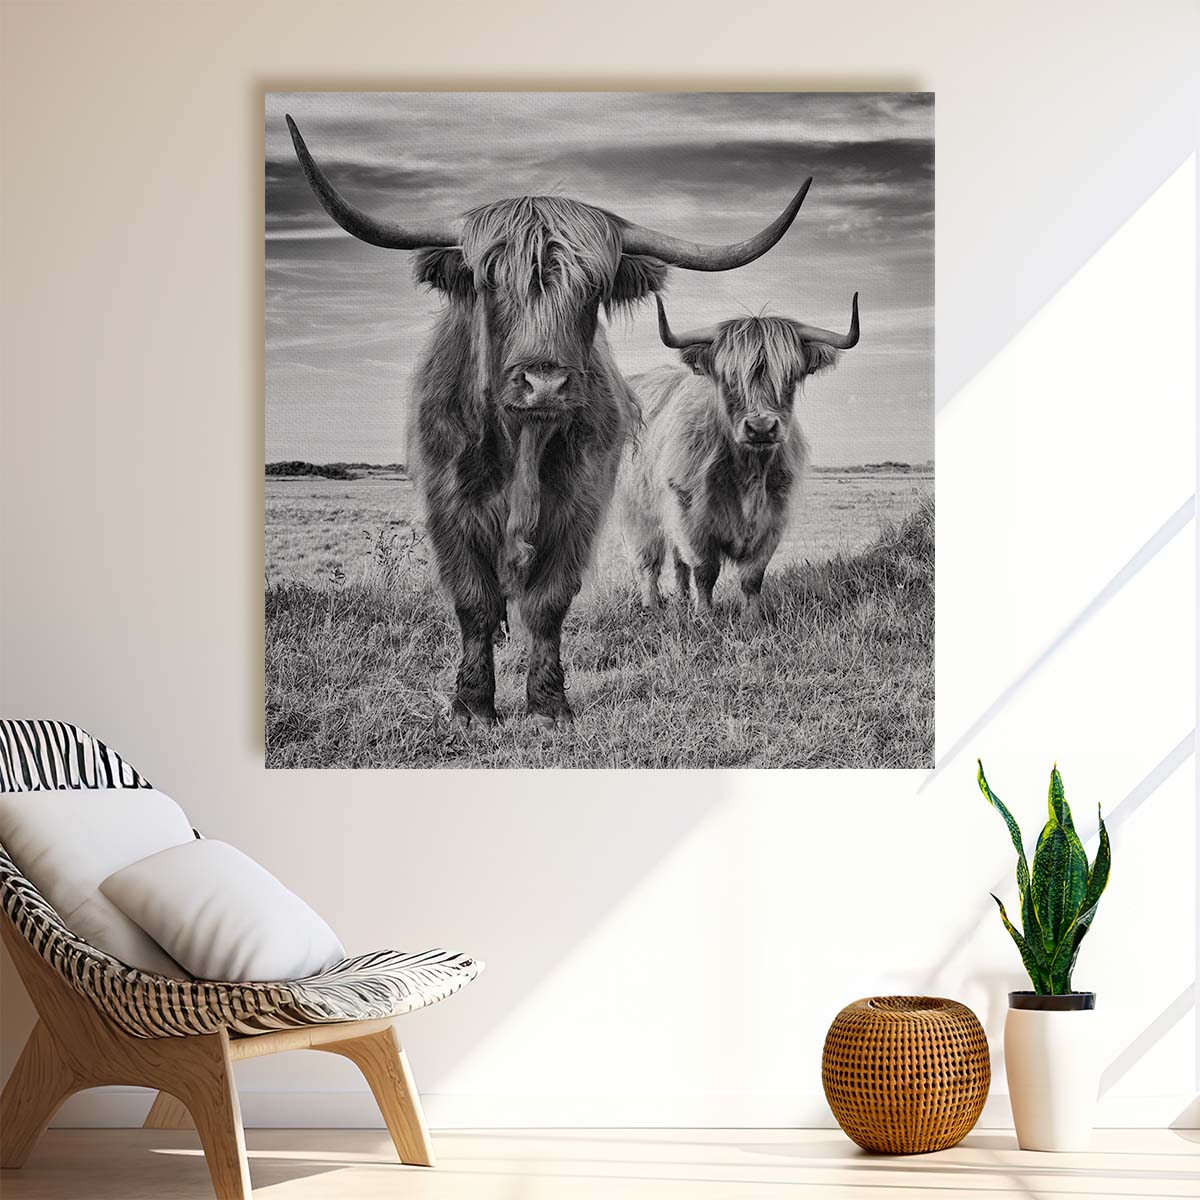 Black & White Highlands Cow Photography Animal Art Wall Art by Luxuriance Designs. Made in USA.